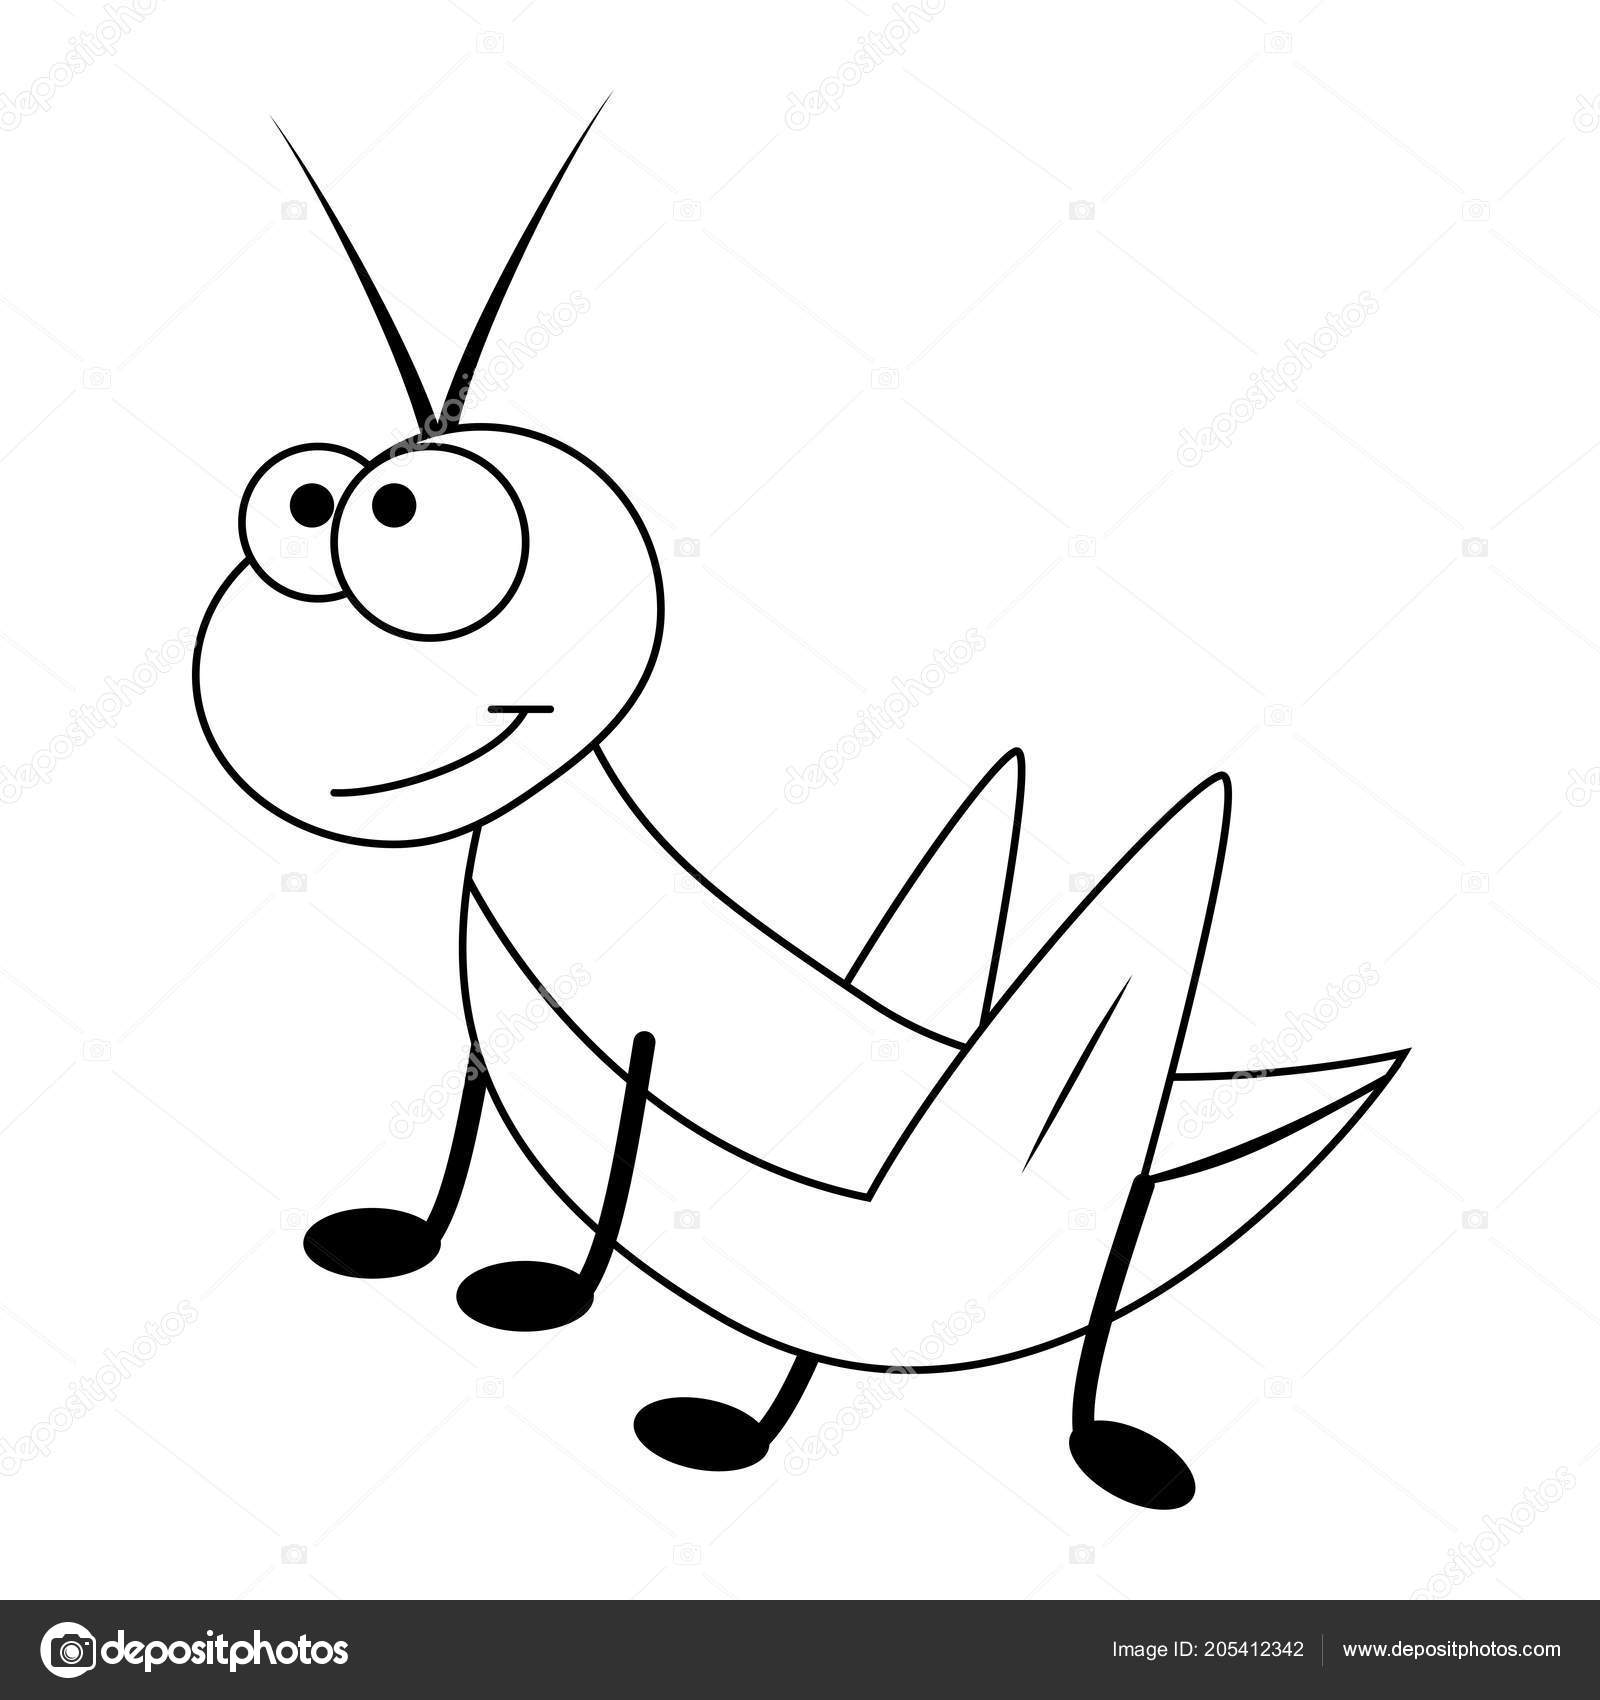 How to Draw a Grasshopper Step by Step Easy Drawing - YouTube